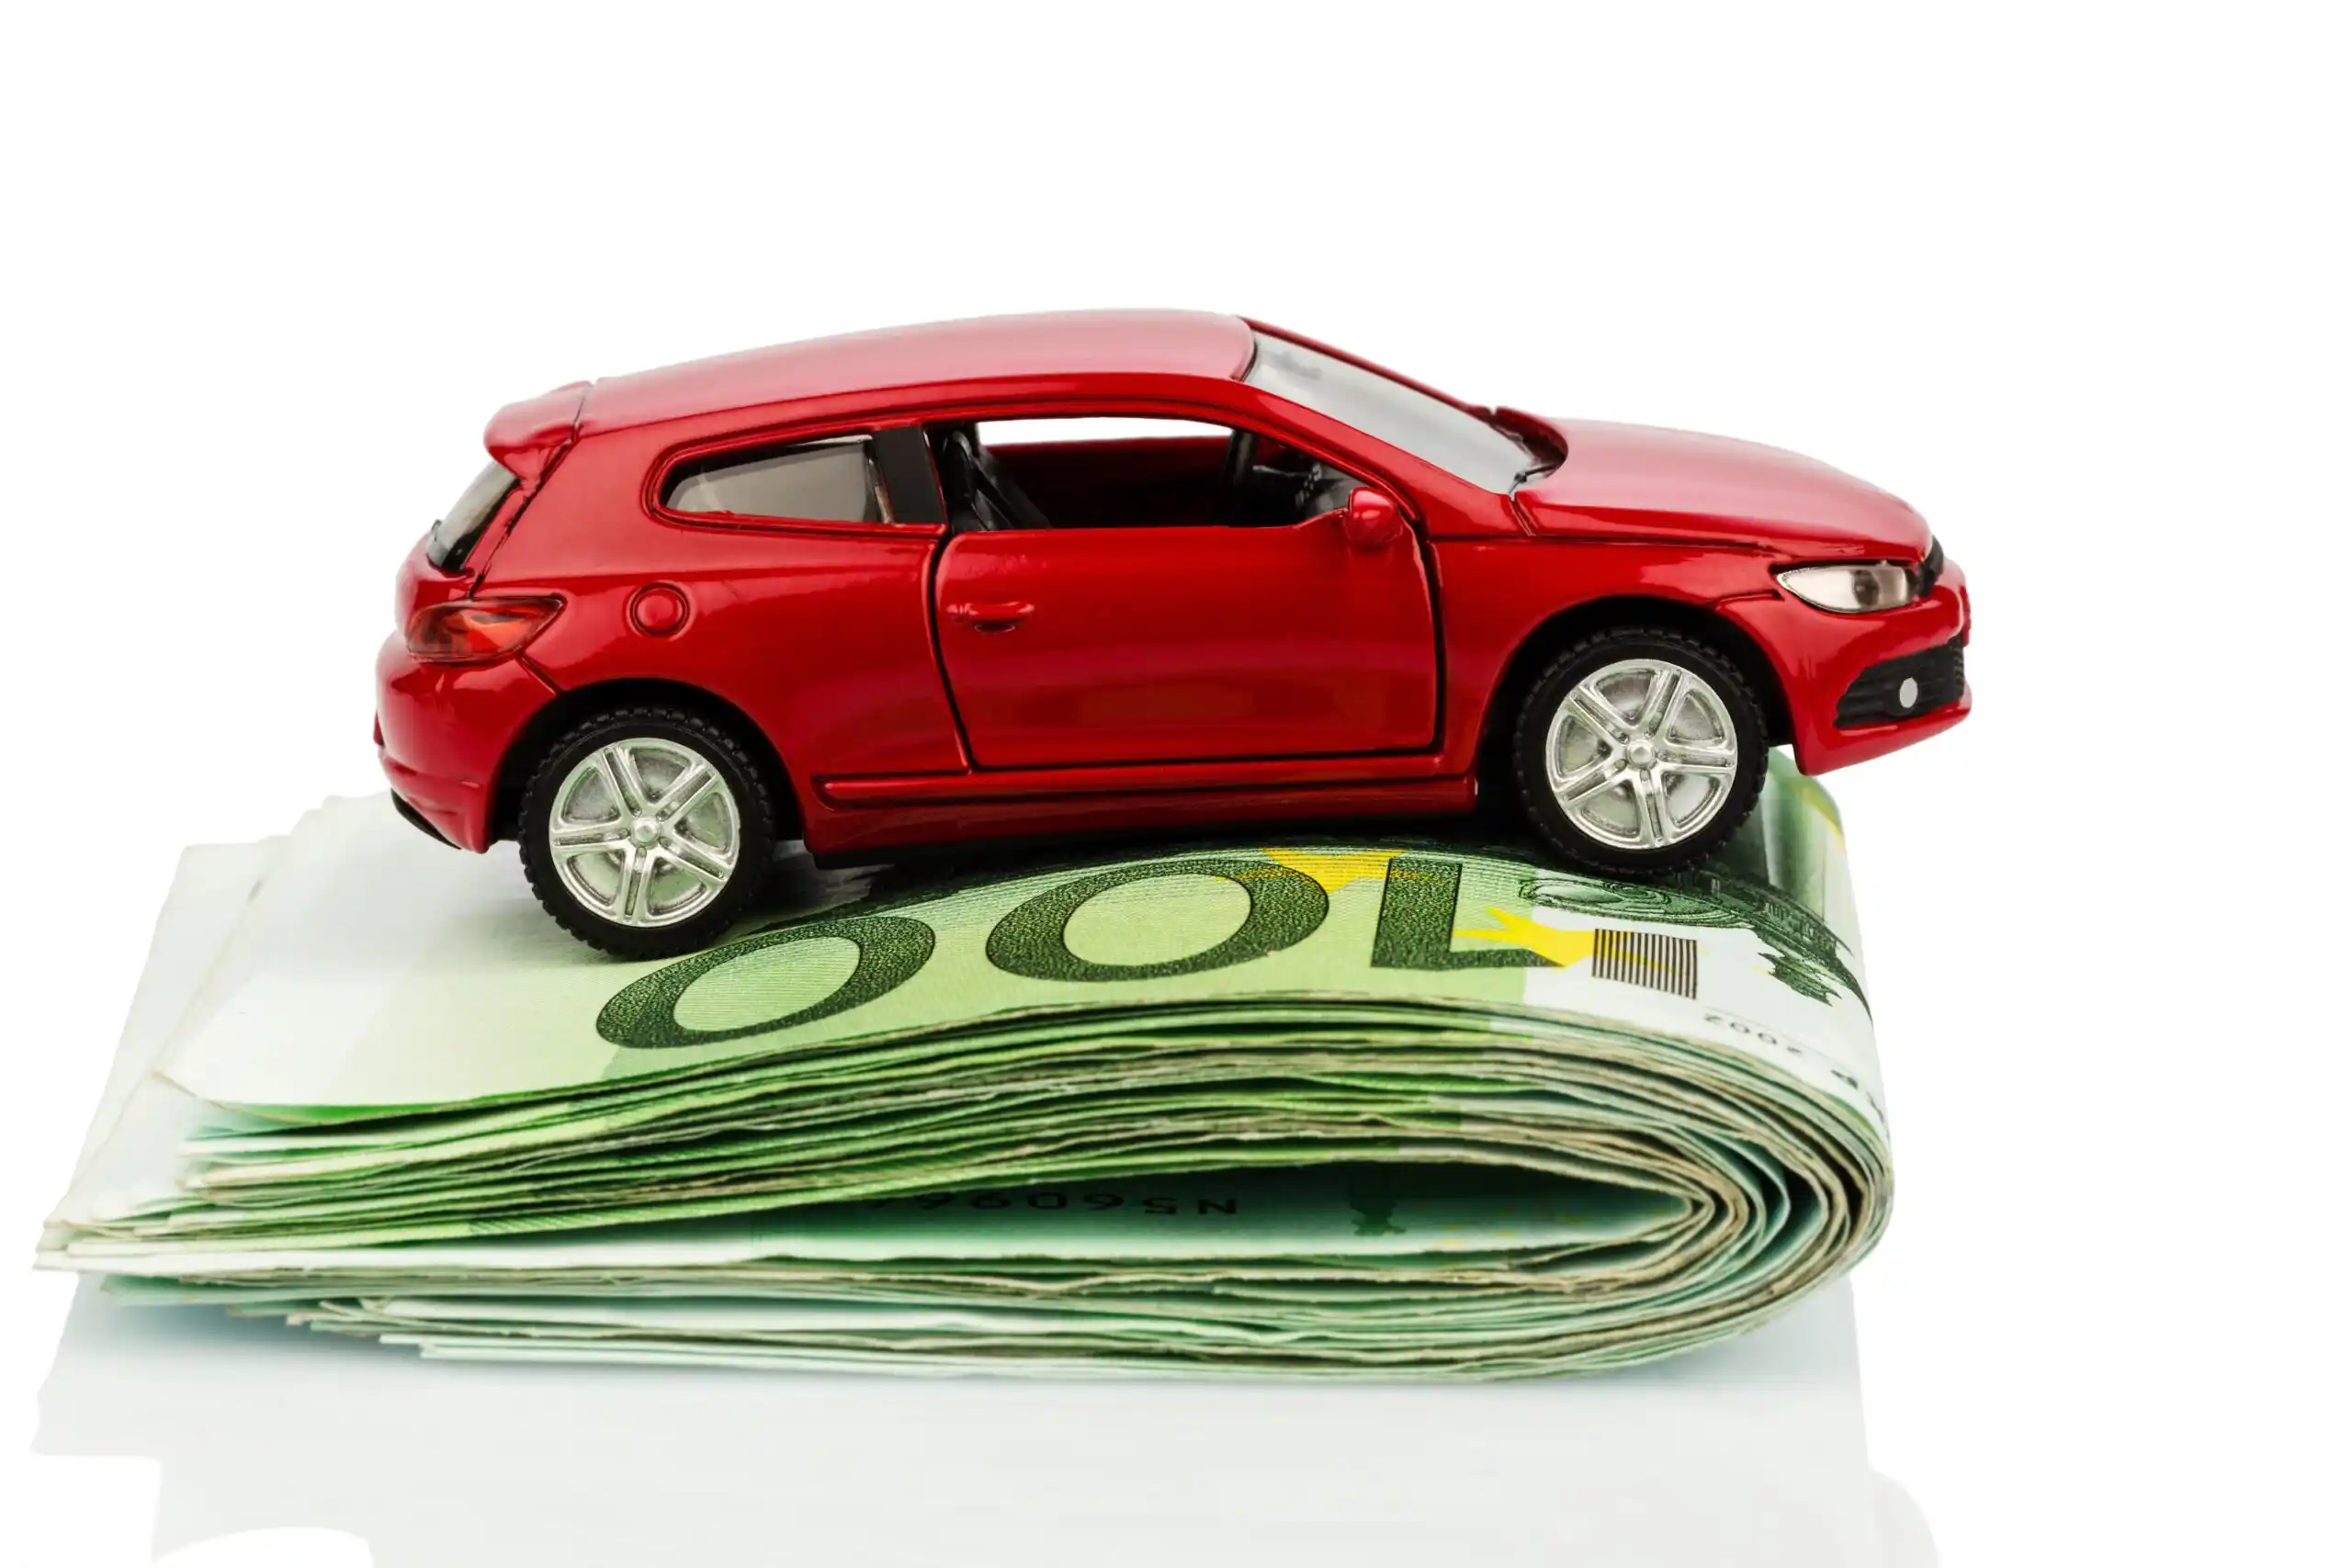 Red Toy Car on Folded Cash